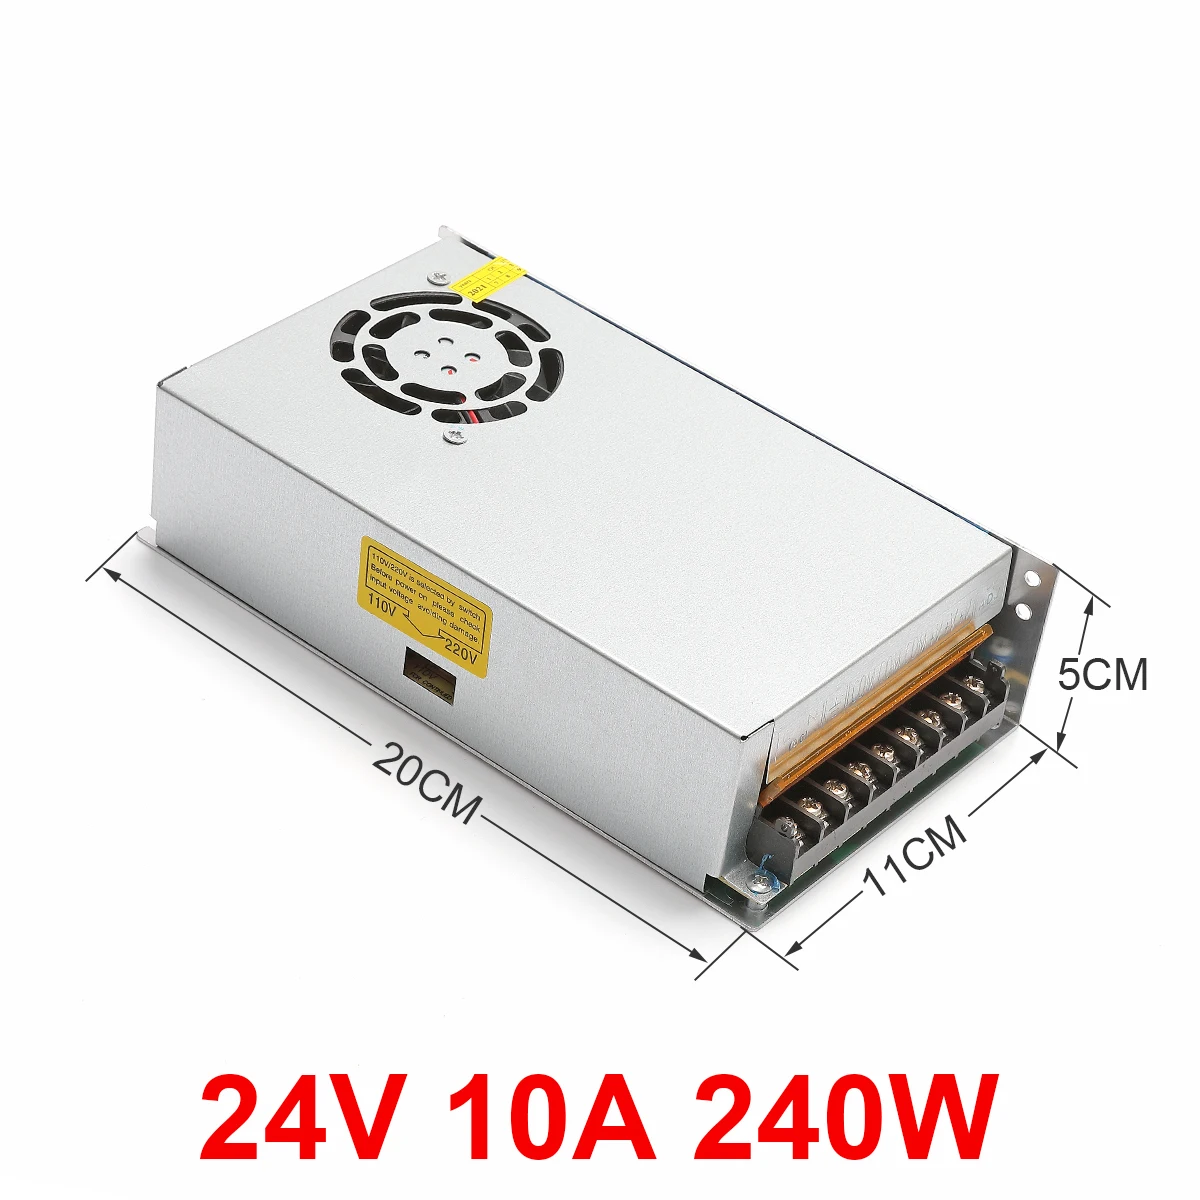 

New Arrival 24V 10A 240W Switching power supply Driver For LED Light Strip Display AC100-240V Factory Supplier Free Shipping